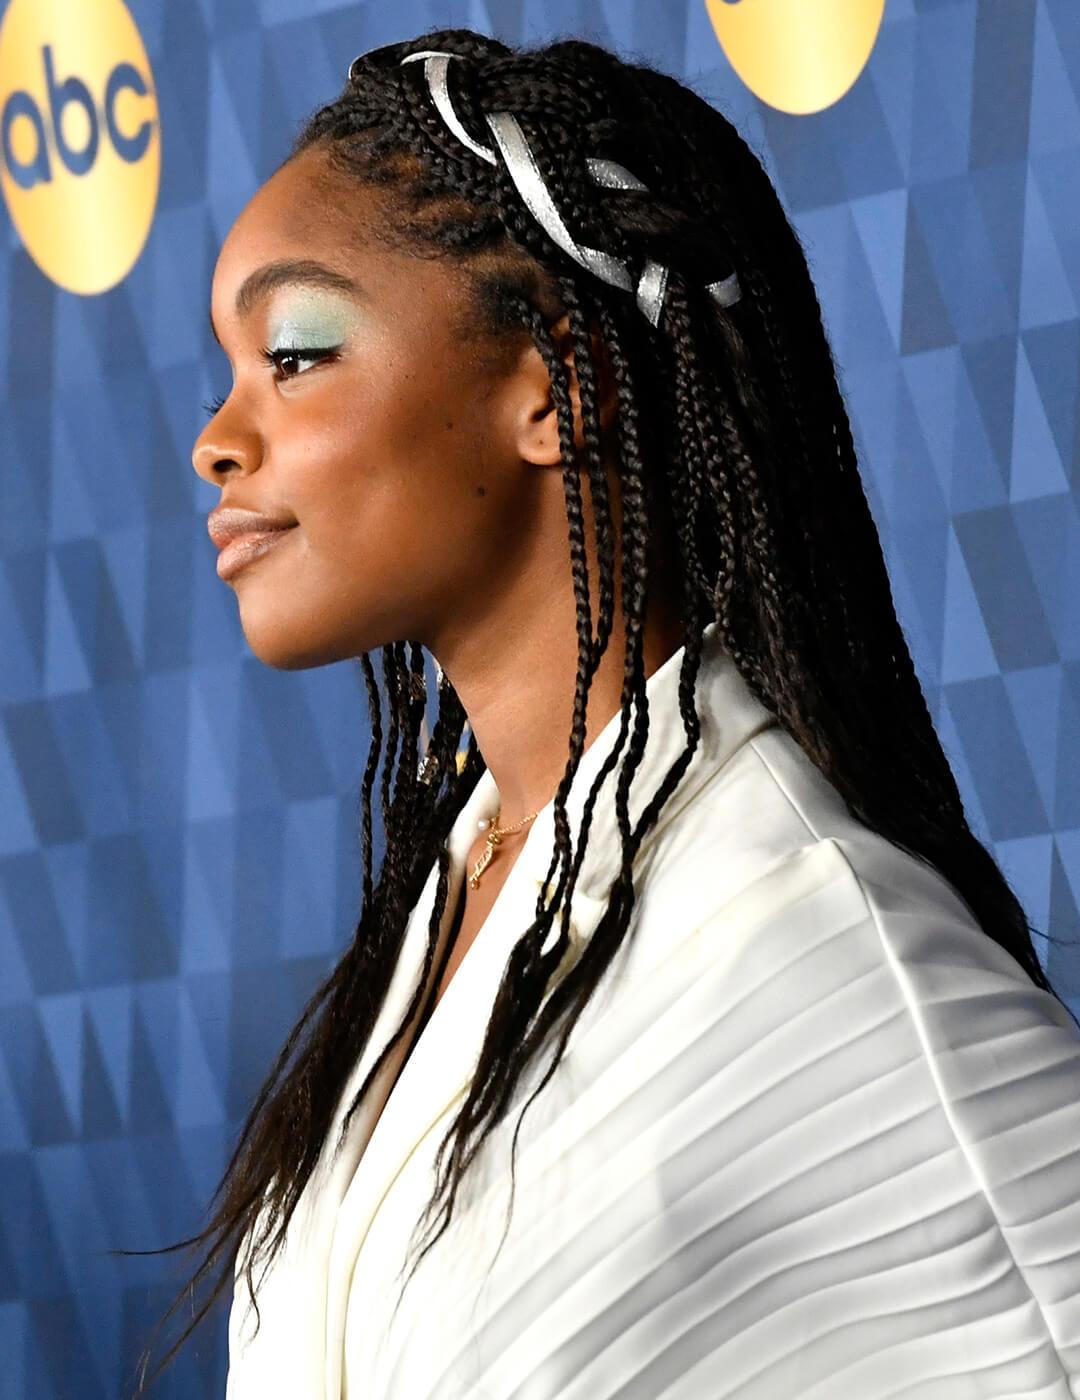 Marsai Martine looking glam in a textured, white dress, light blue green eyeshadow look, and braided hairstyle woven with silver ribbon